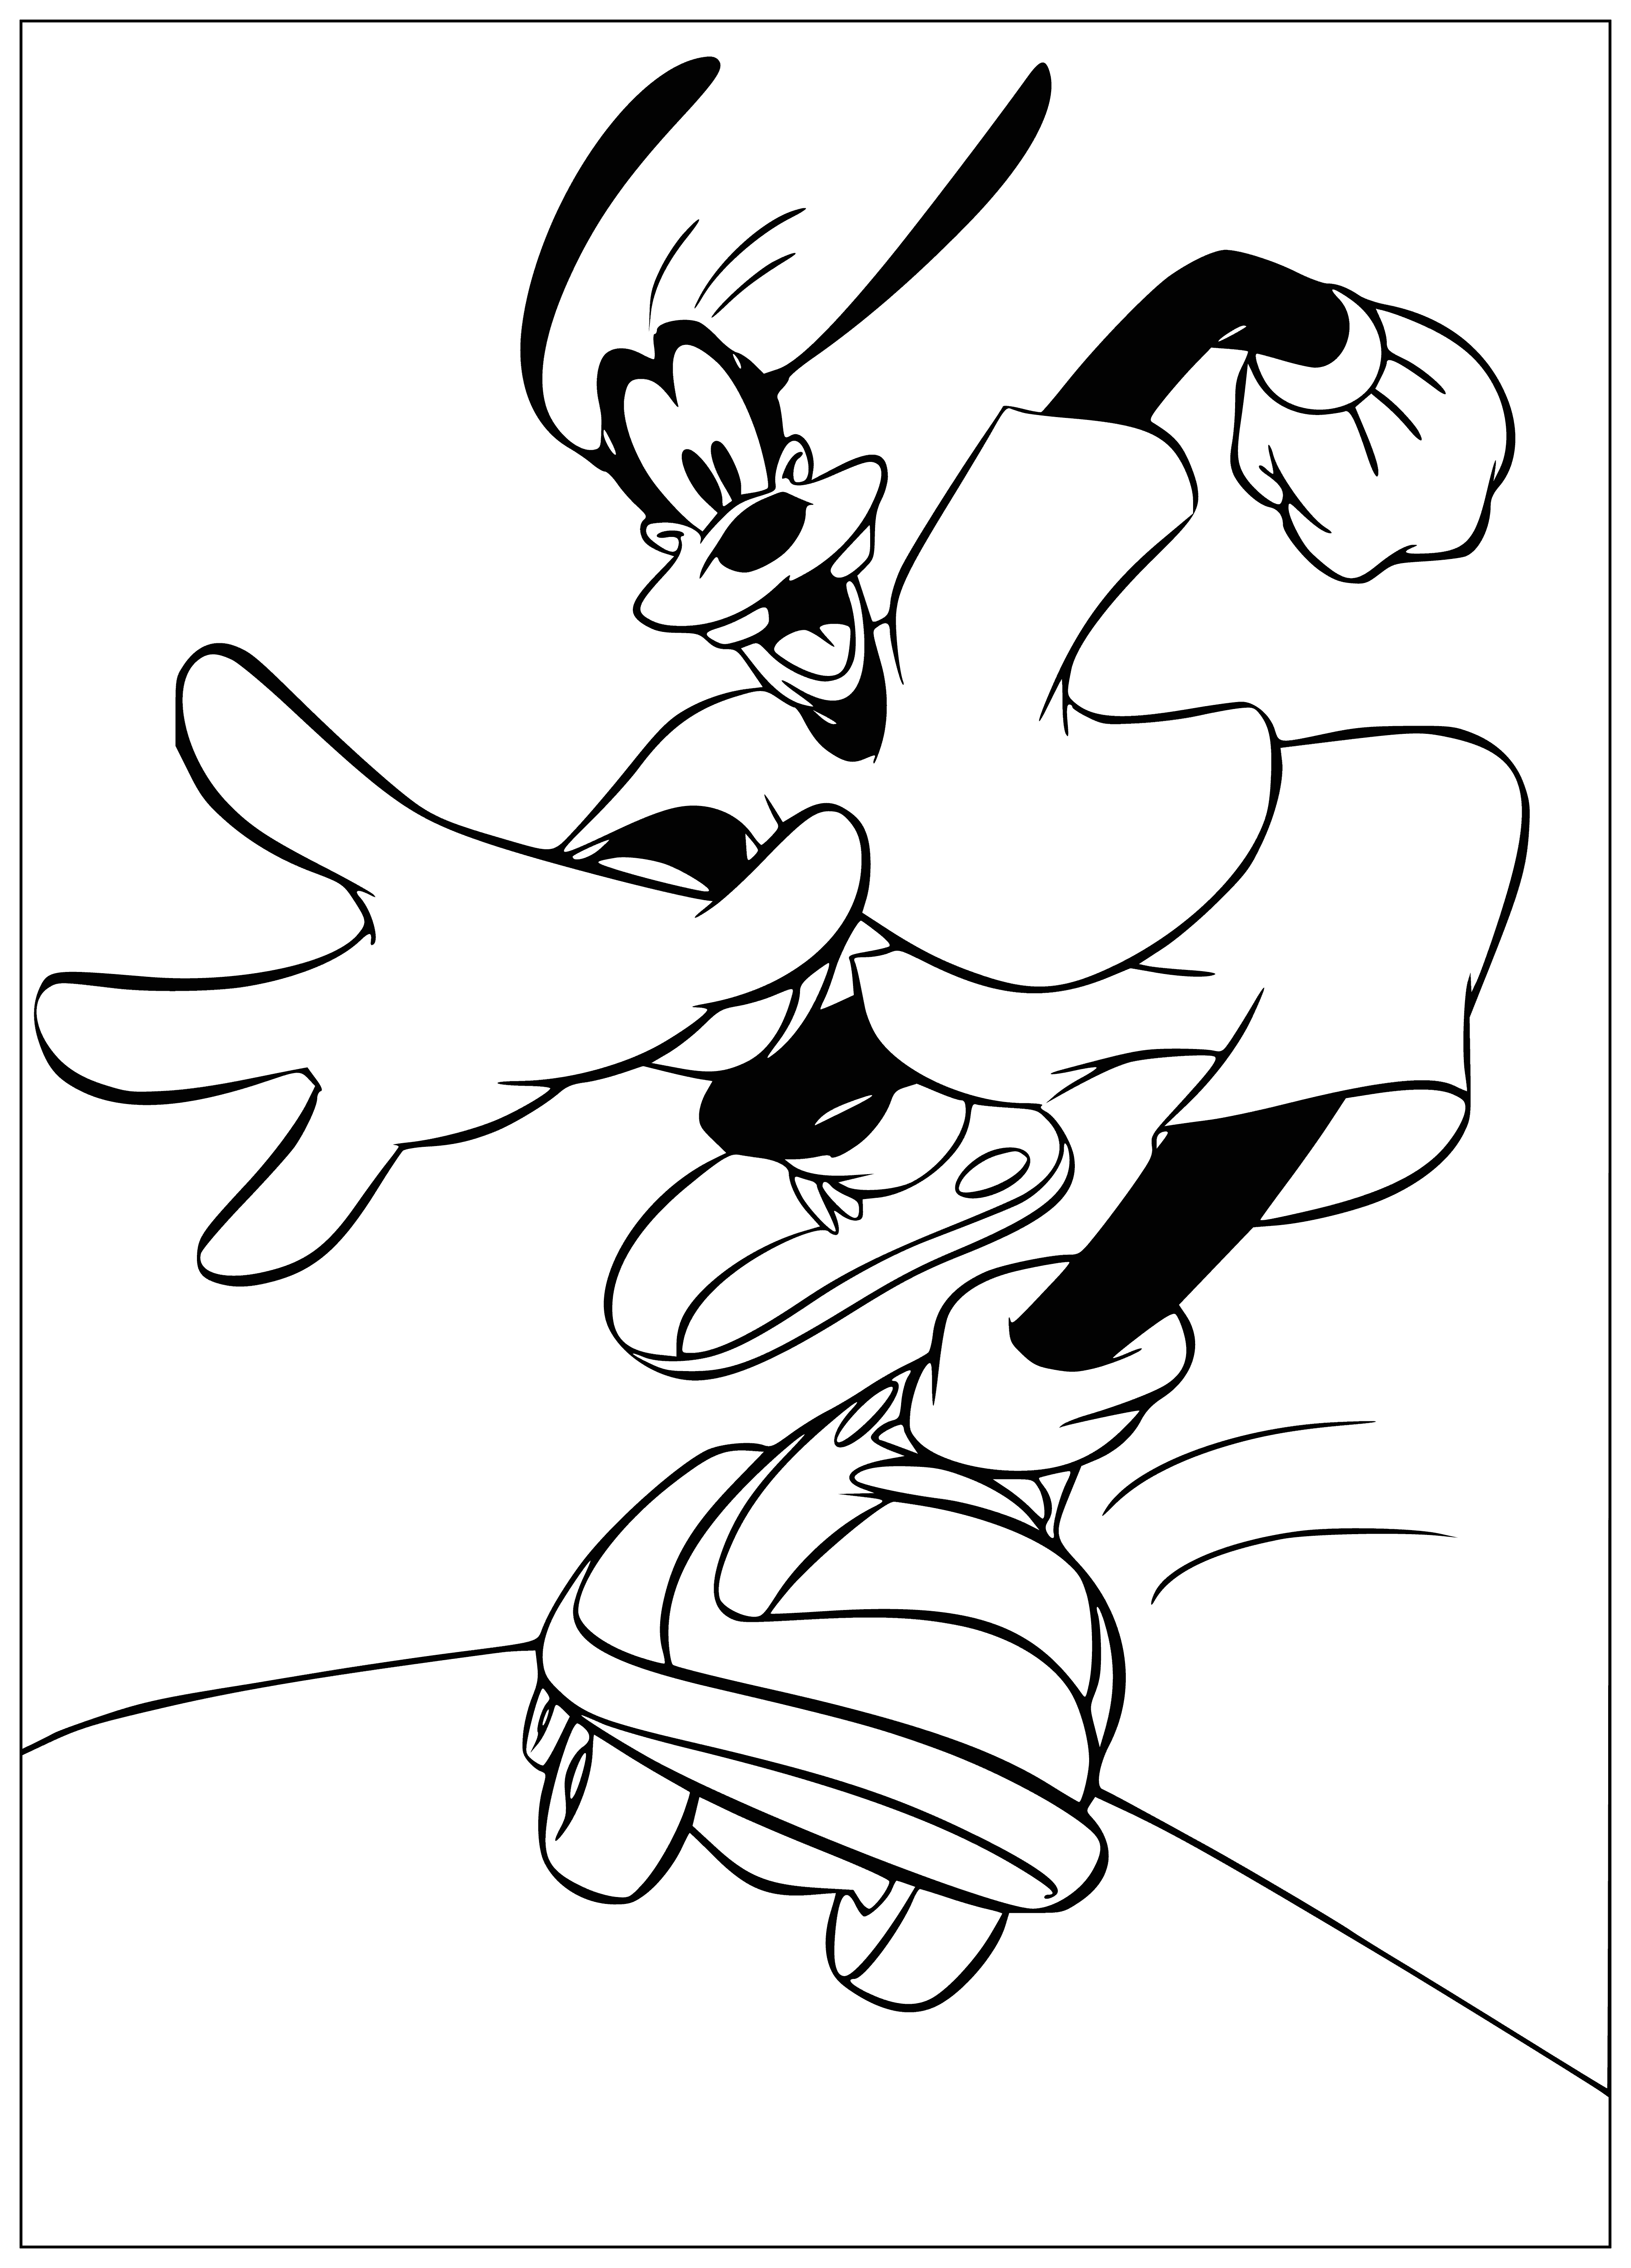 coloring page: Mickey & Goofy skate wearing helmets, pads, & gloves; Mickey backwards, Goofy forwards, both smiling.